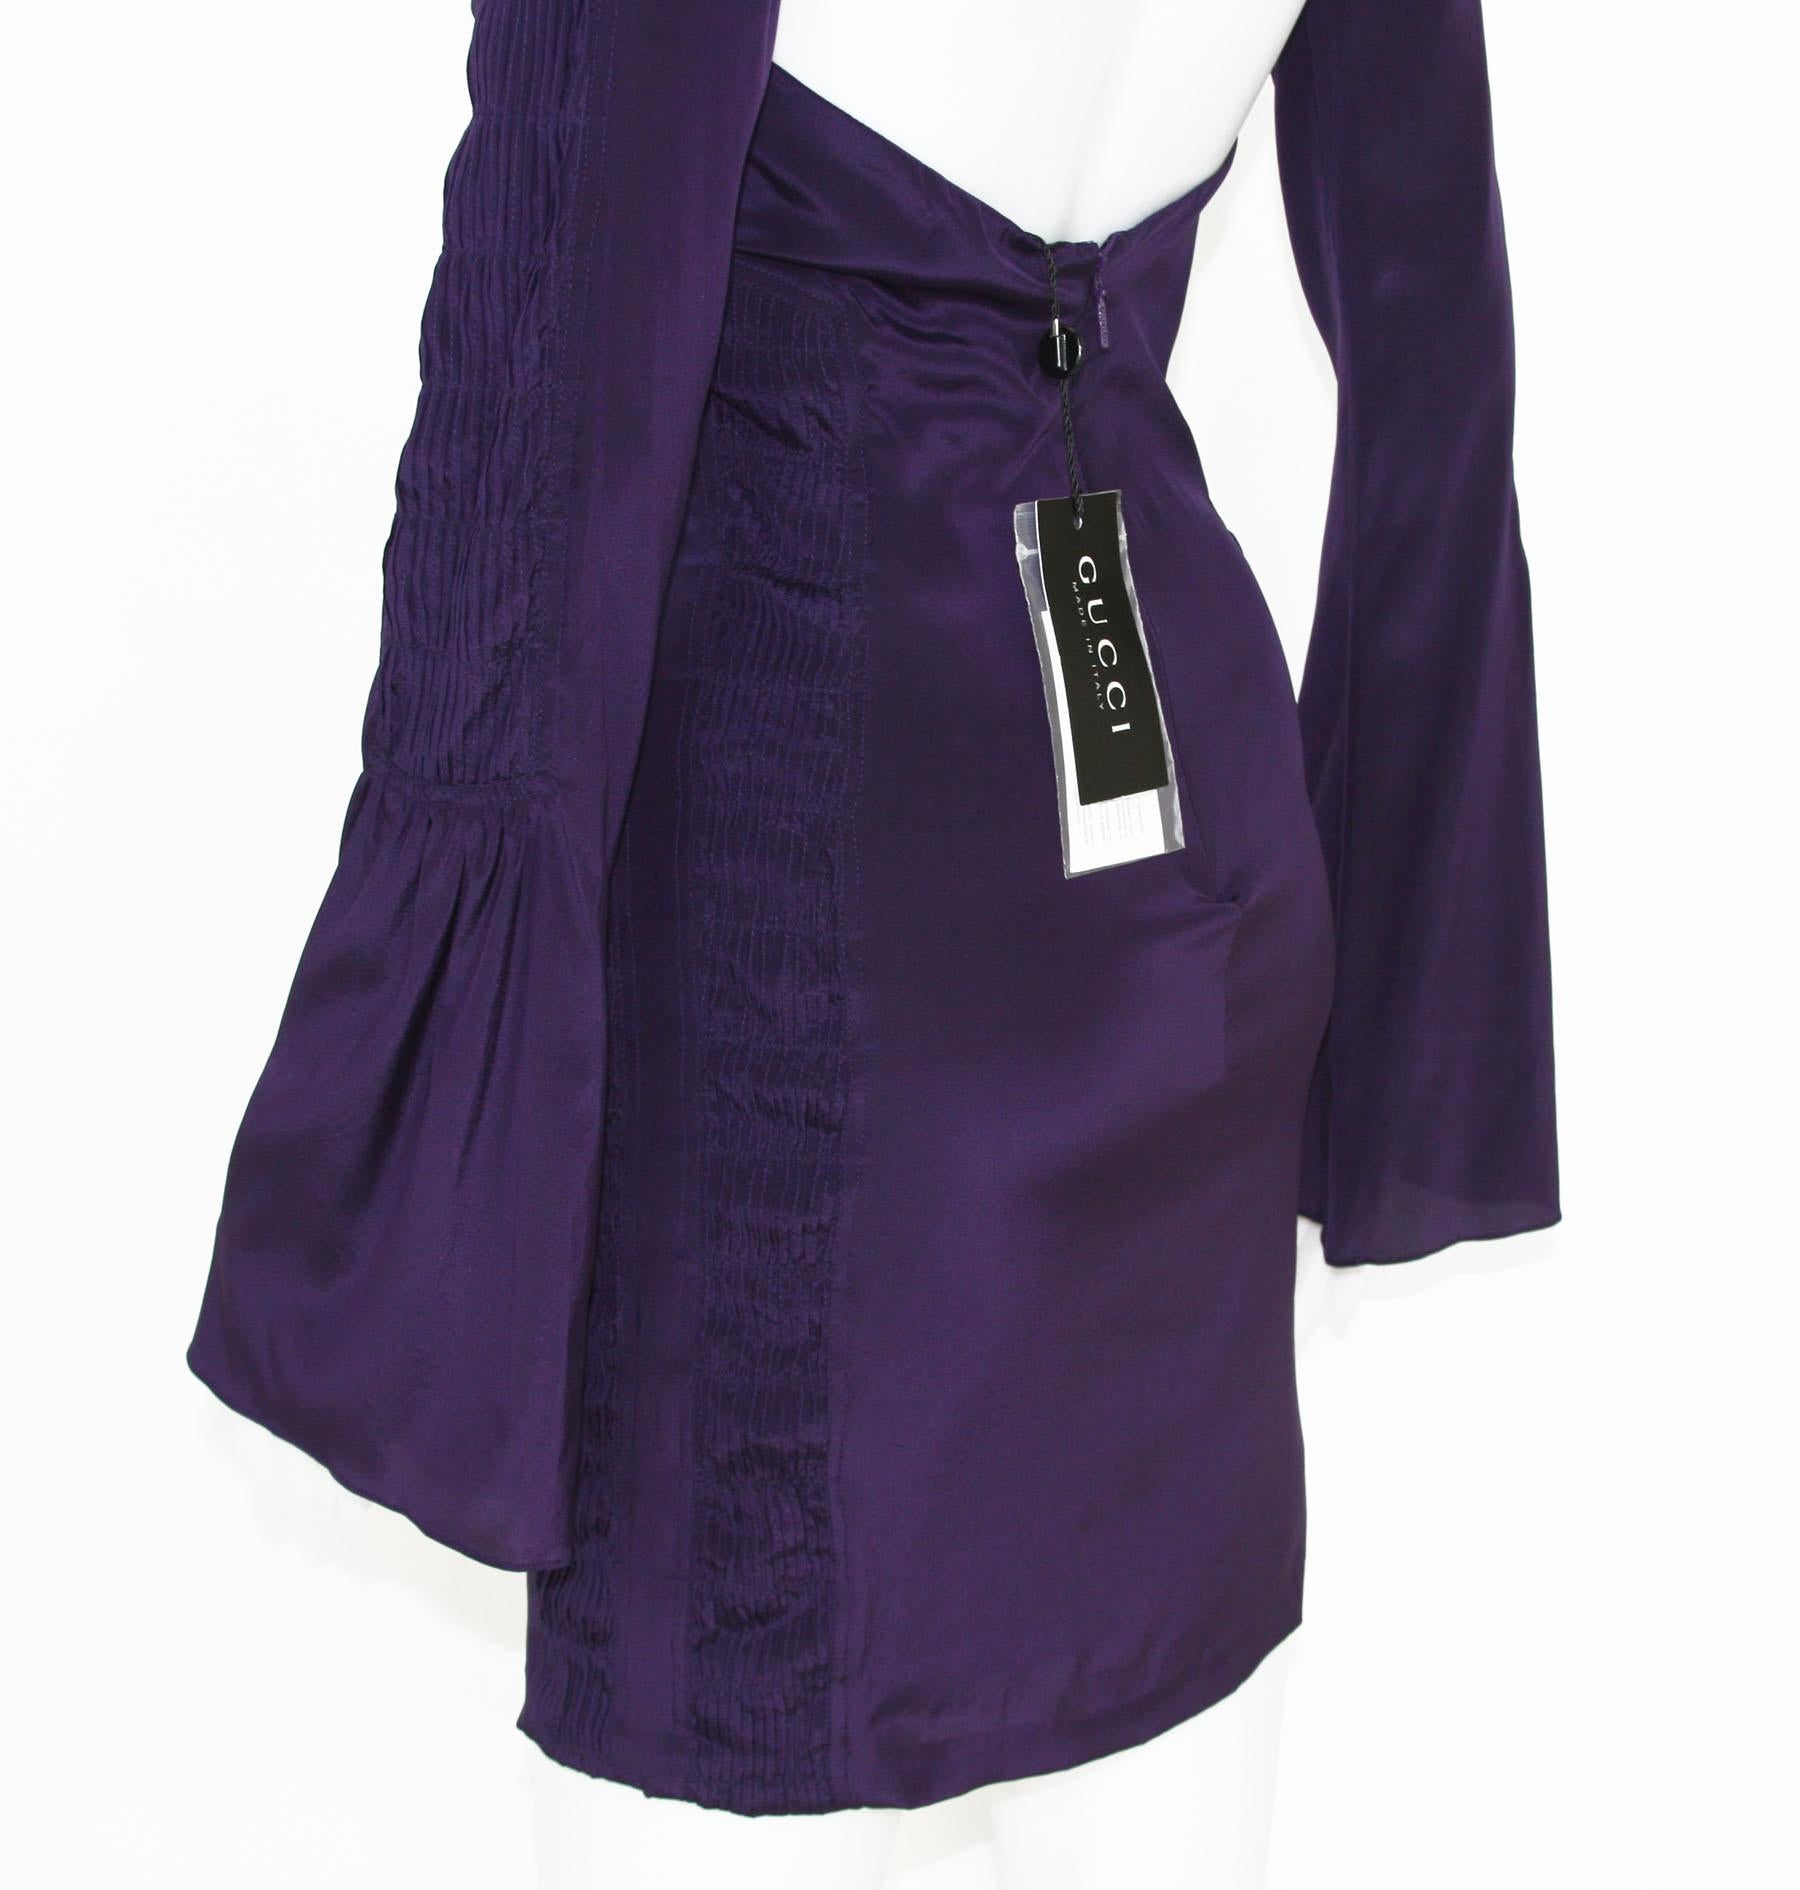 New Tom Ford for Gucci S/S 2004 Deep Purple Silk Plunging Backless Mini Dress 38 1